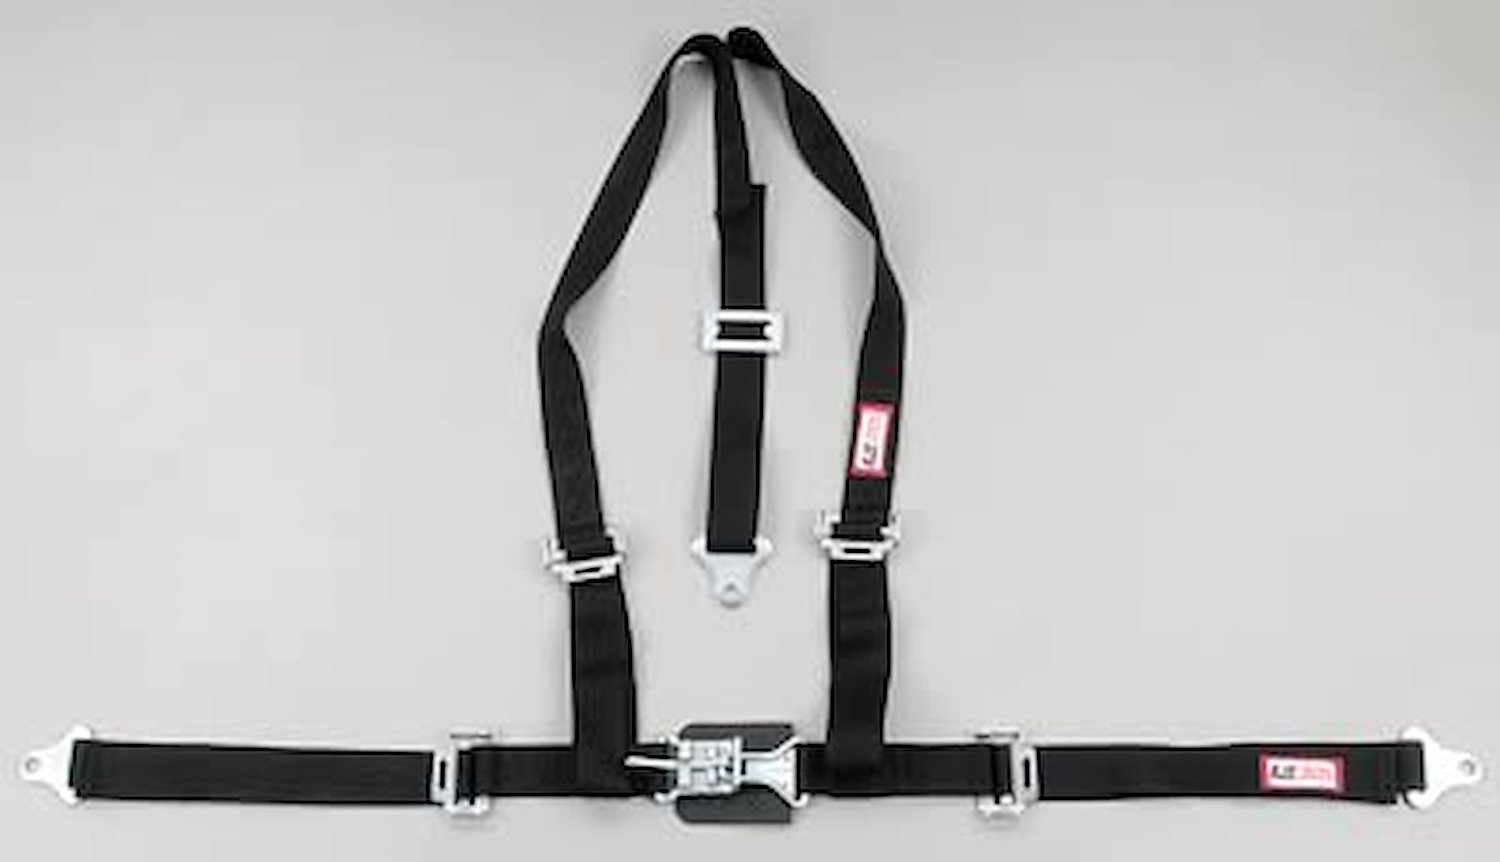 NON-SFI L&L HARNESS 3 PULL DOWN Lap Belt SEWN IN 2 Shoulder Harness V ROLL BAR Mount ALL SNAP ENDS RED